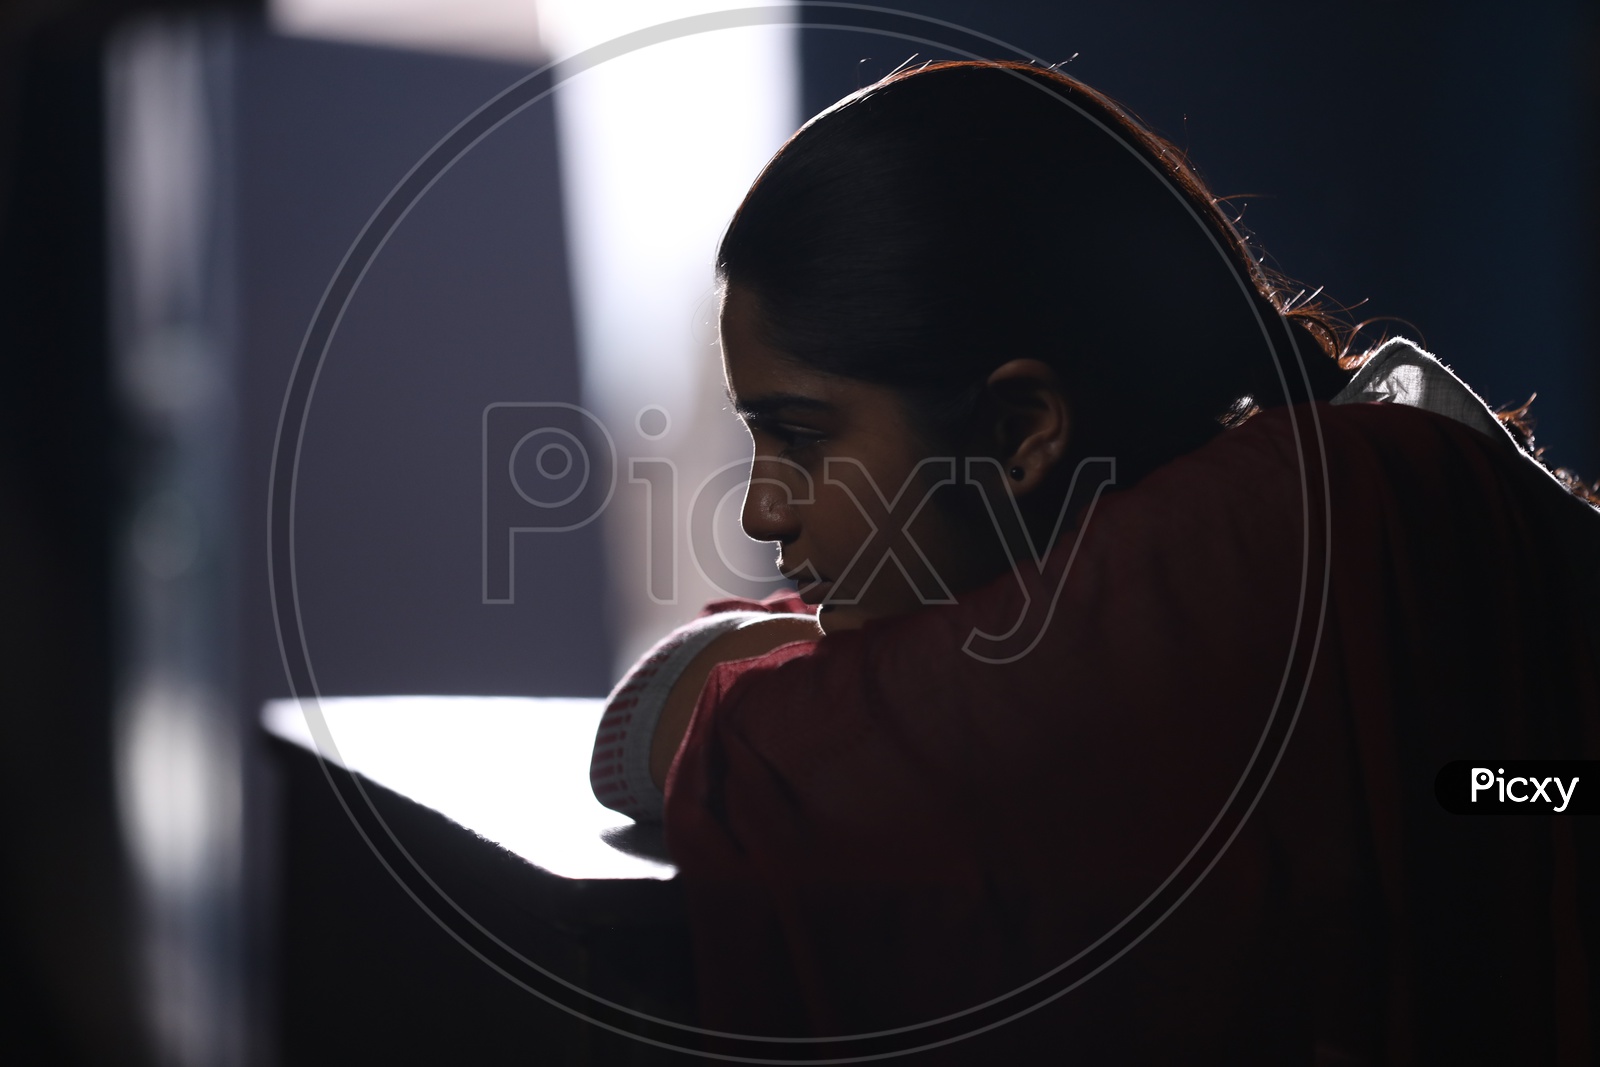 A Girl Sitting Sadly In a Classroom With Dark Light ambiance